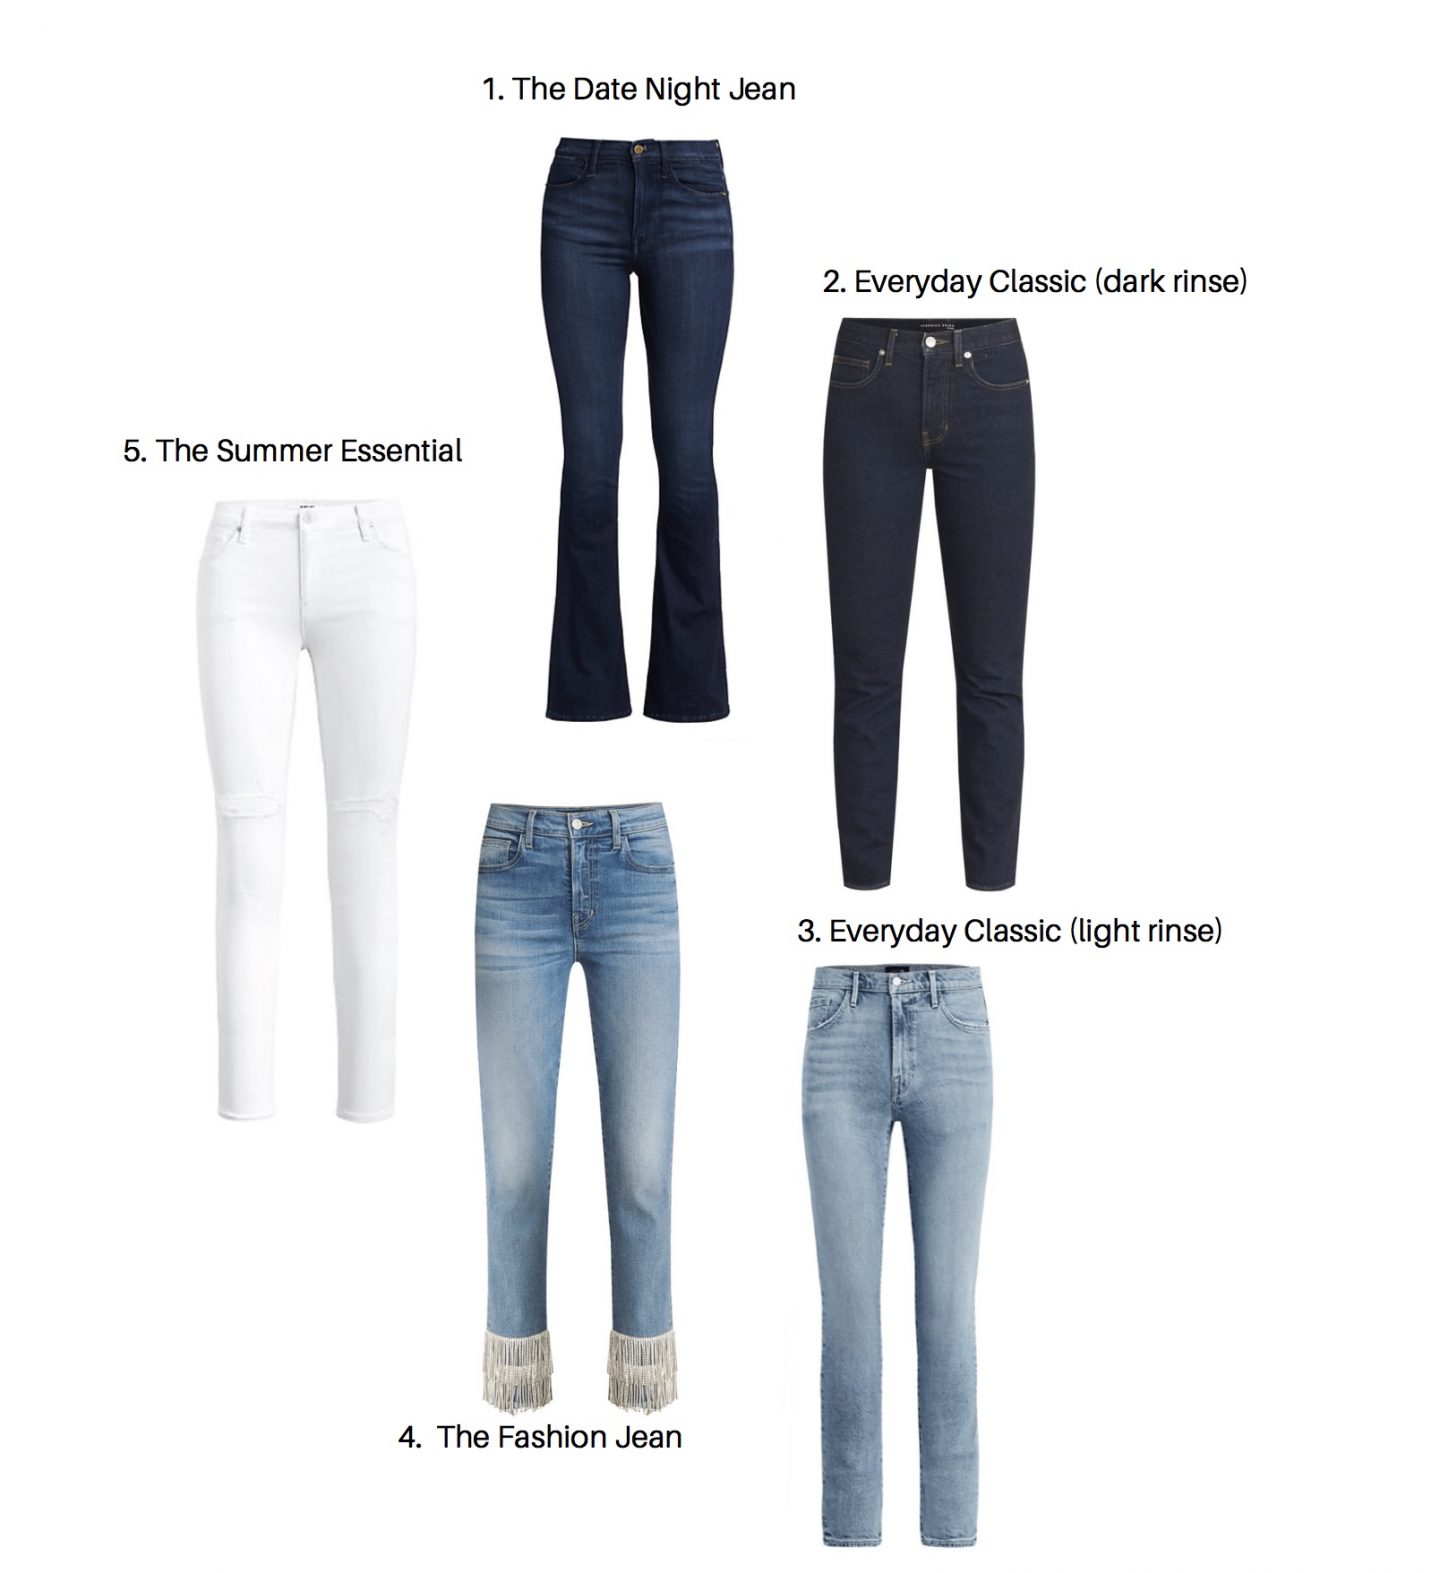 How Many Pairs of Jeans Does the Average American Own?